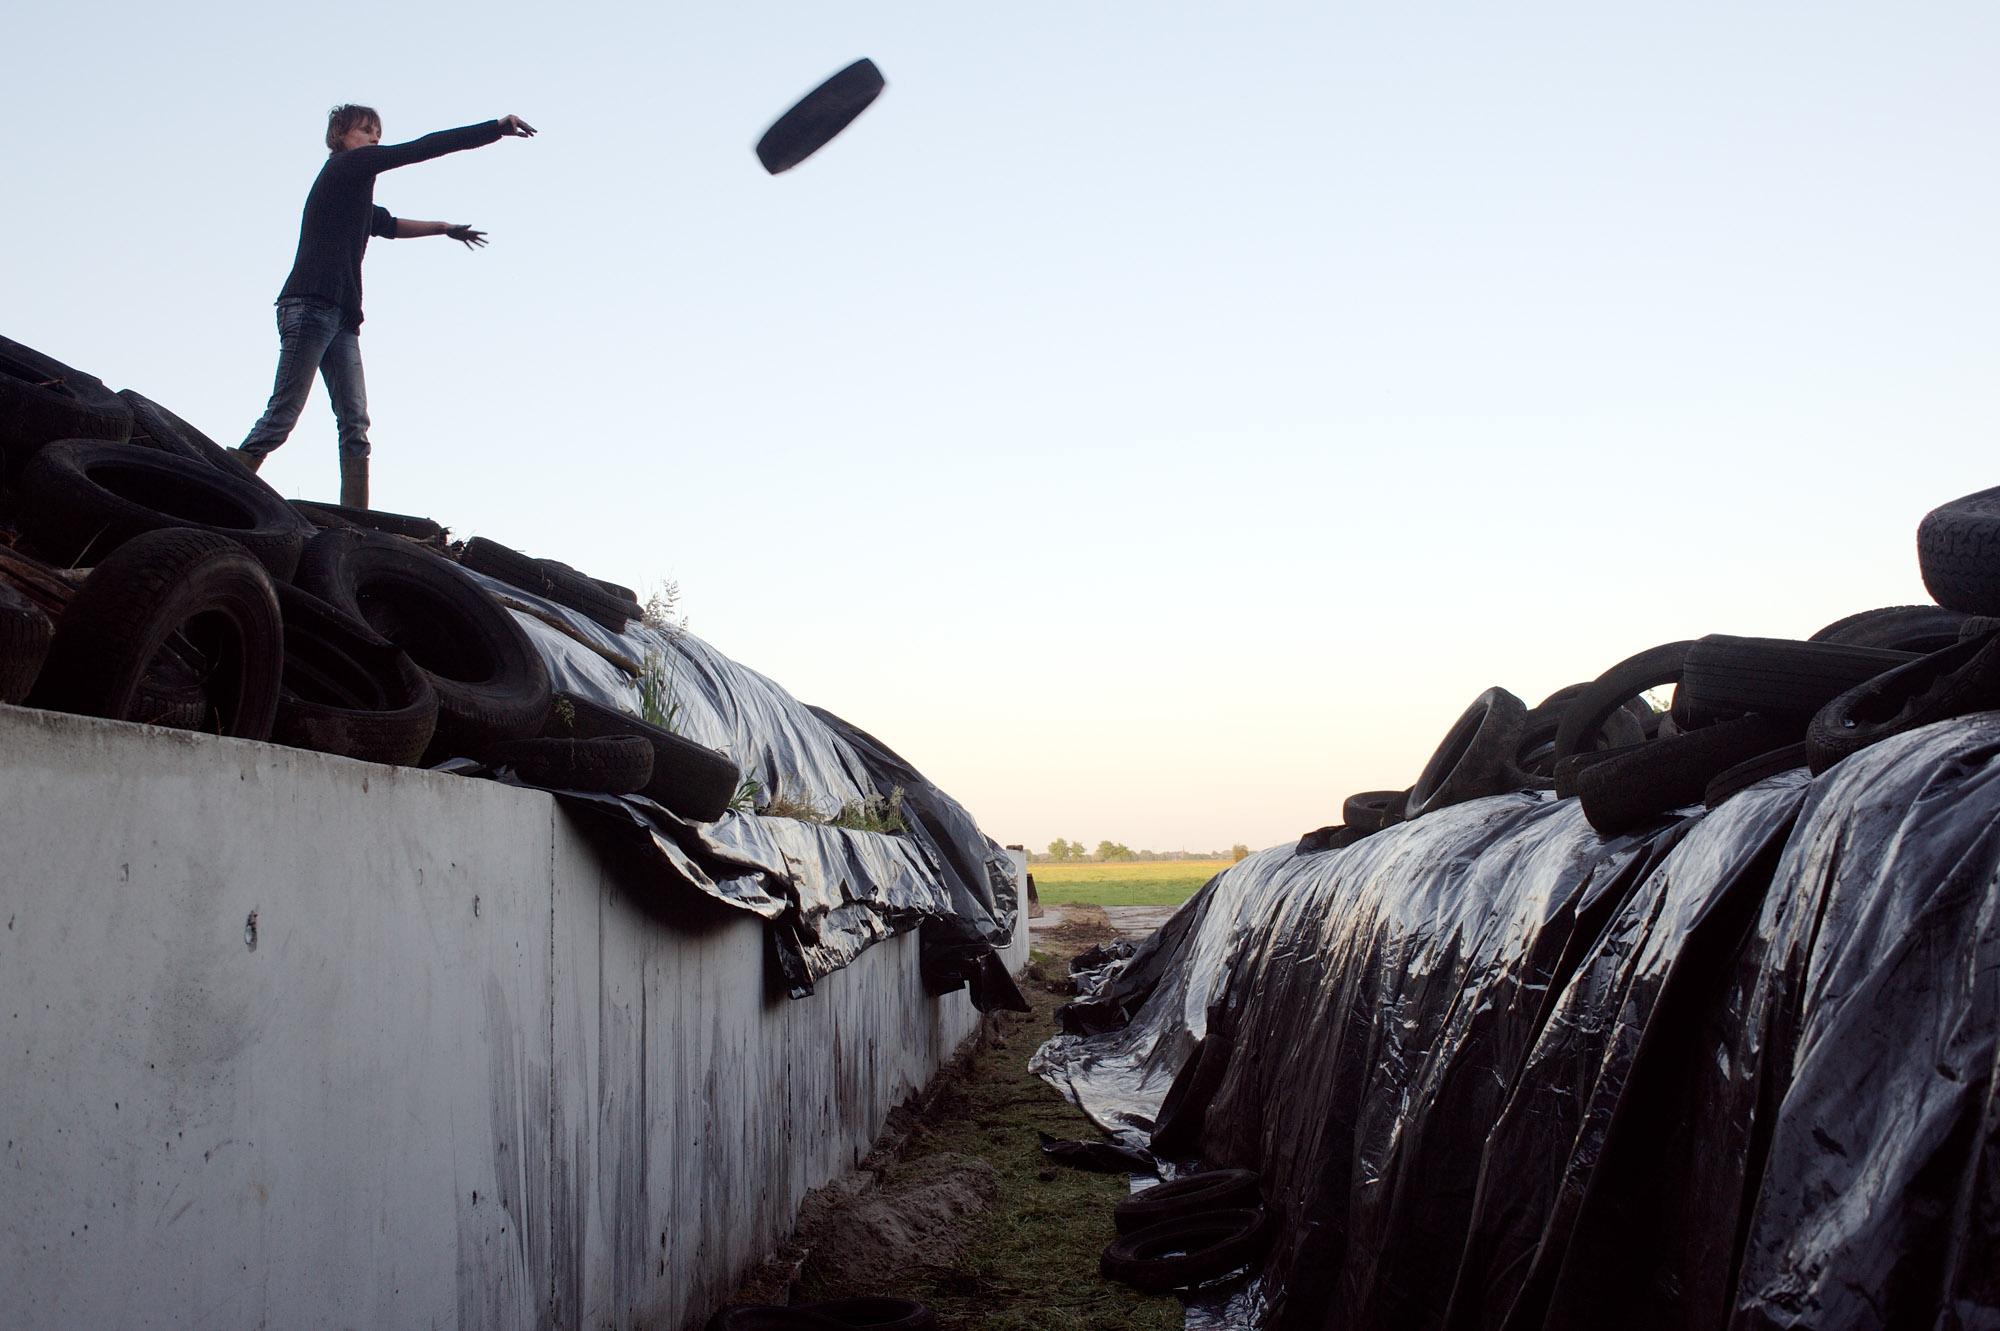 The Other Farm - Maaike is throwing old car tires onto the plastic that...